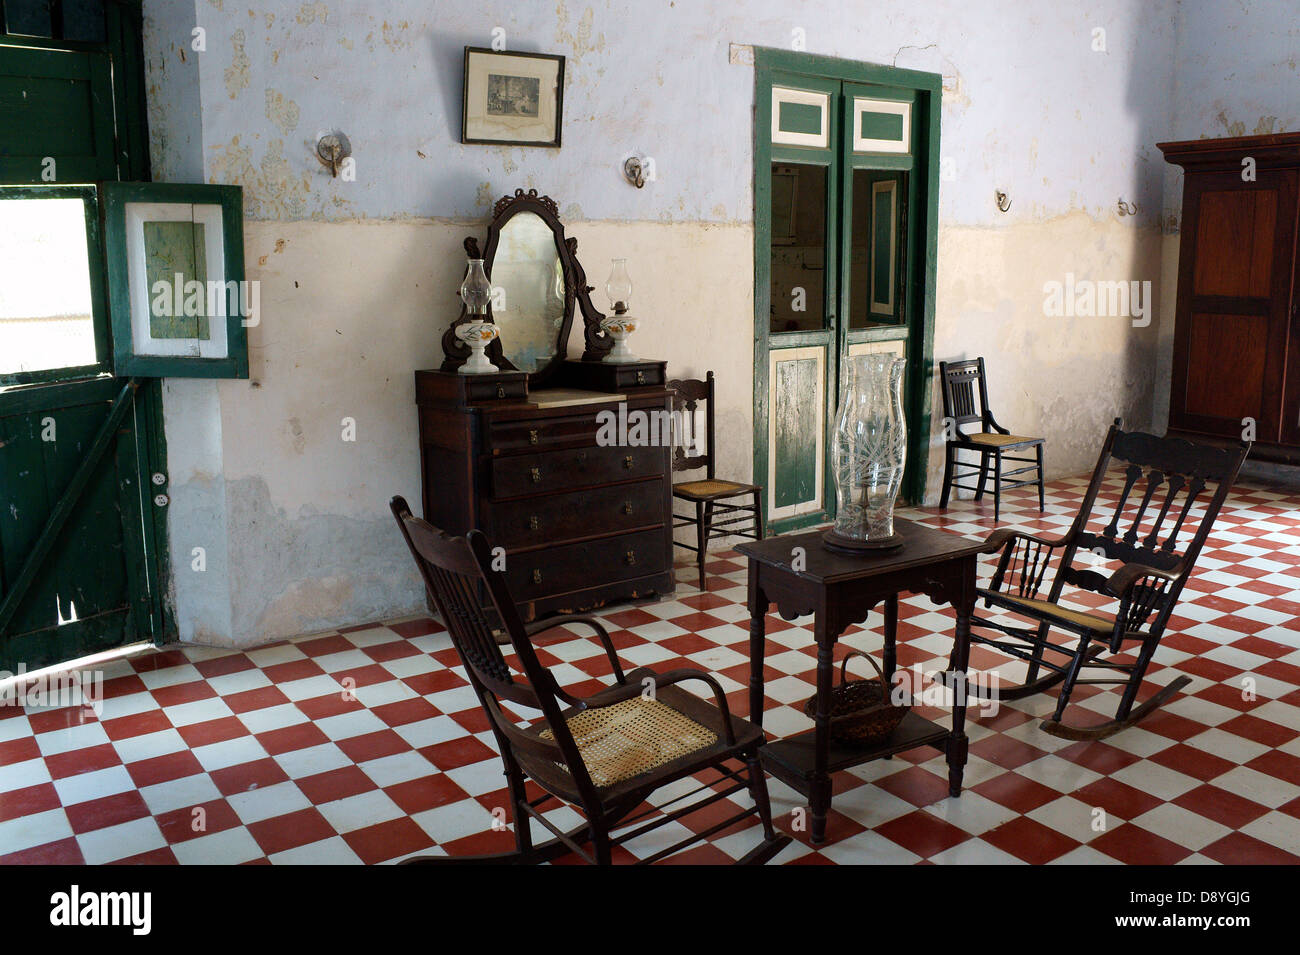 Room with colonial antique furniture in the main building at Hacienda Yaxcopoil, Yucatan, Mexico Stock Photo